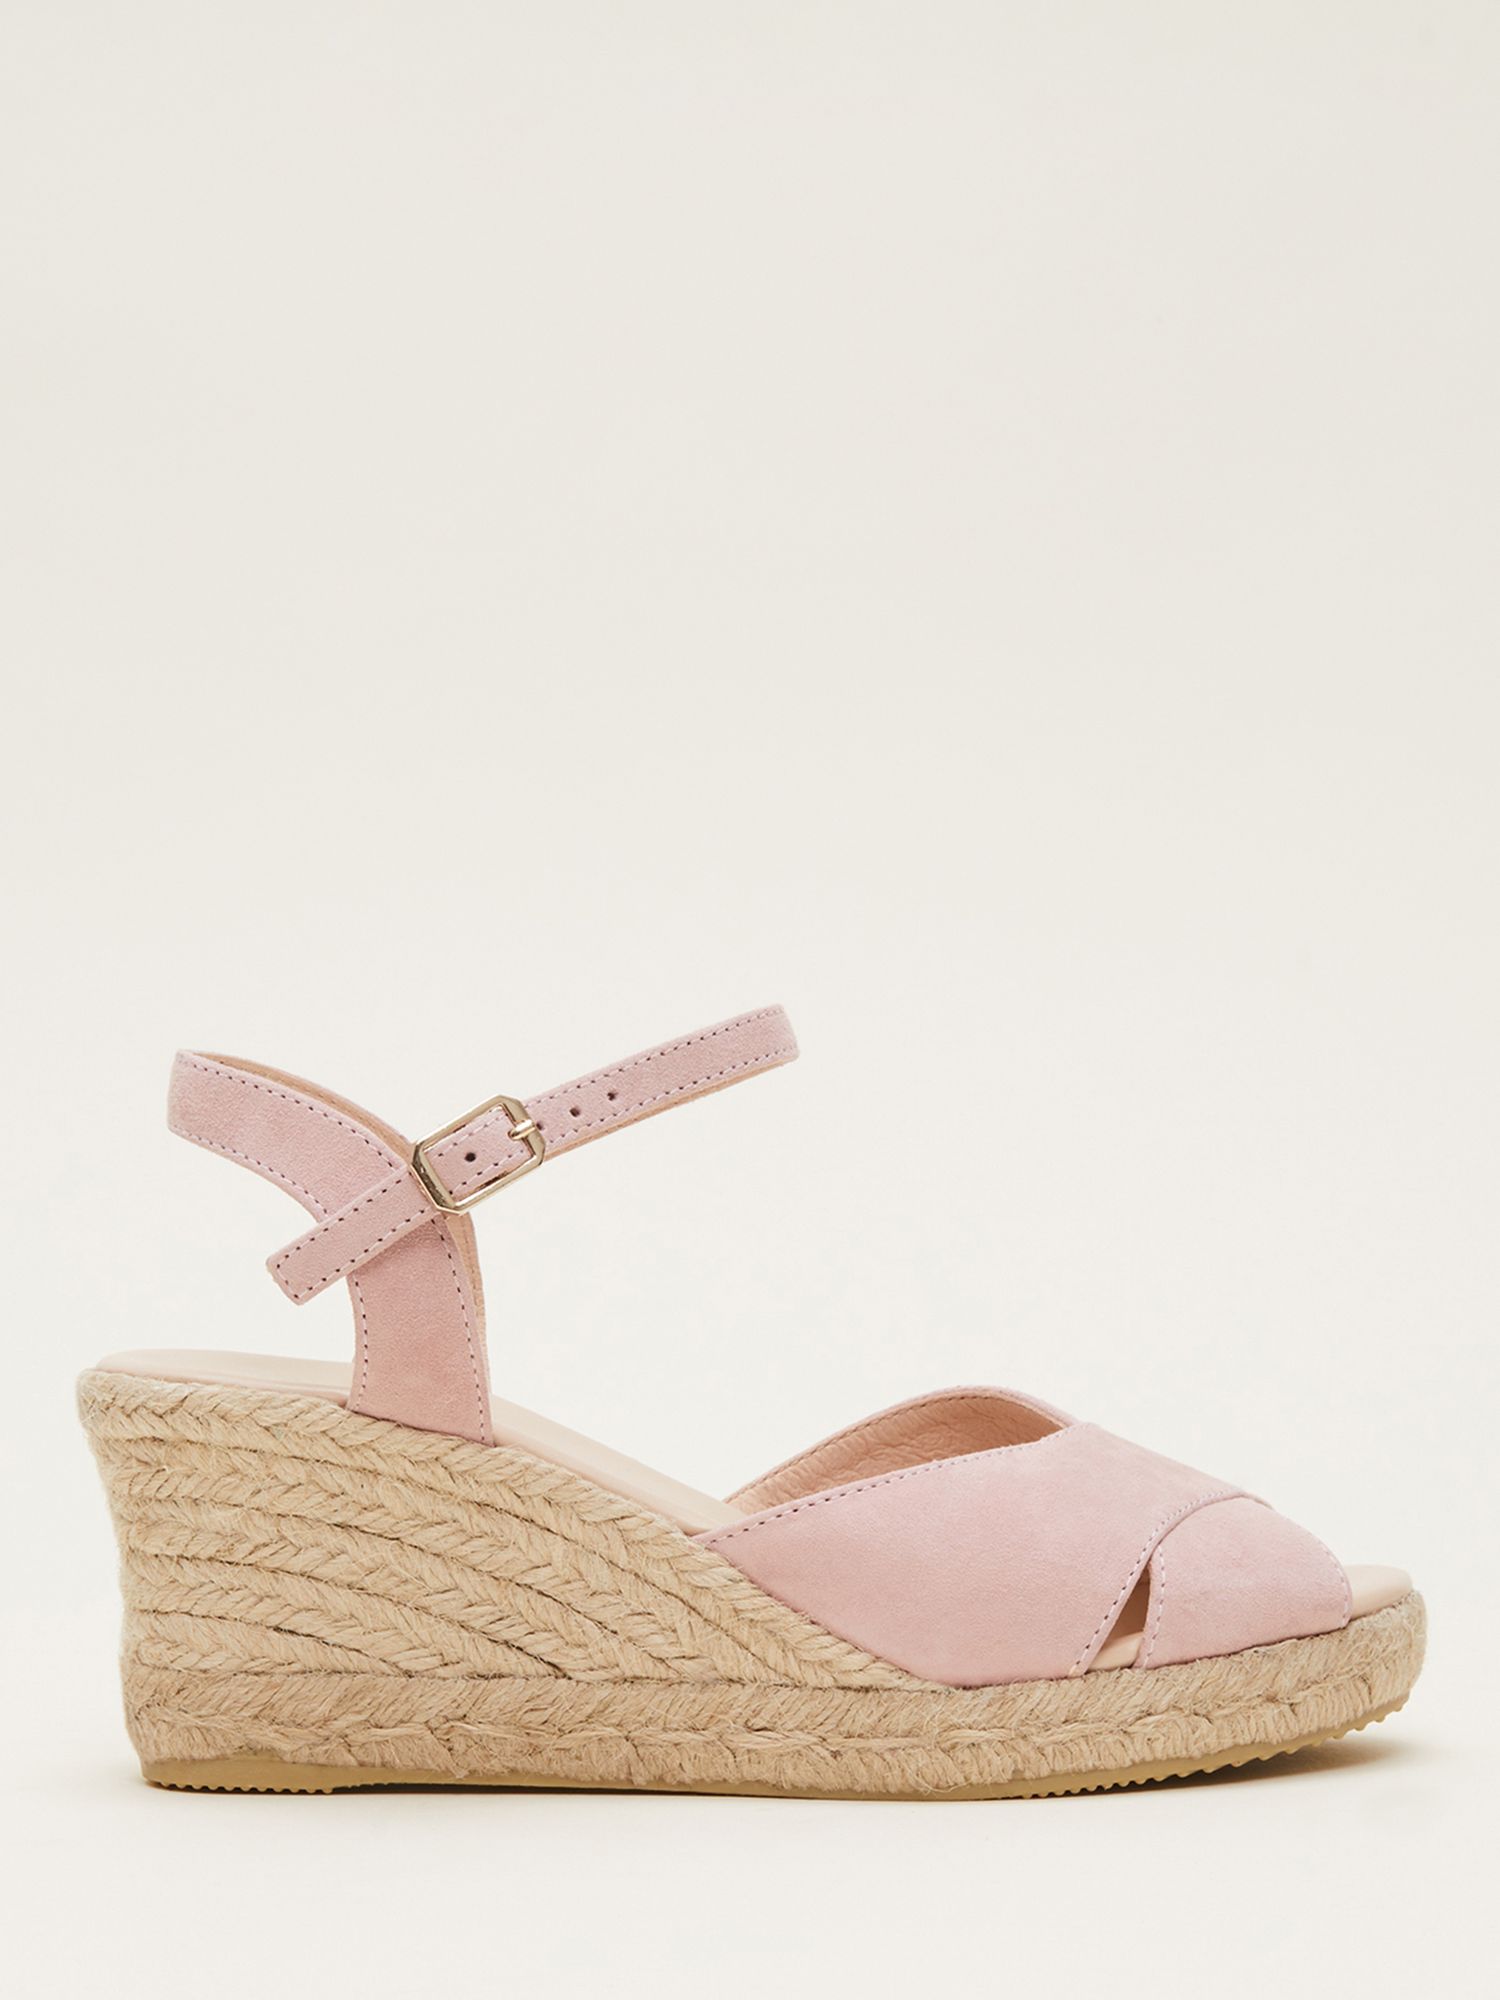 Phase Eight Suede Espadrilles, Light Pink at John Lewis & Partners